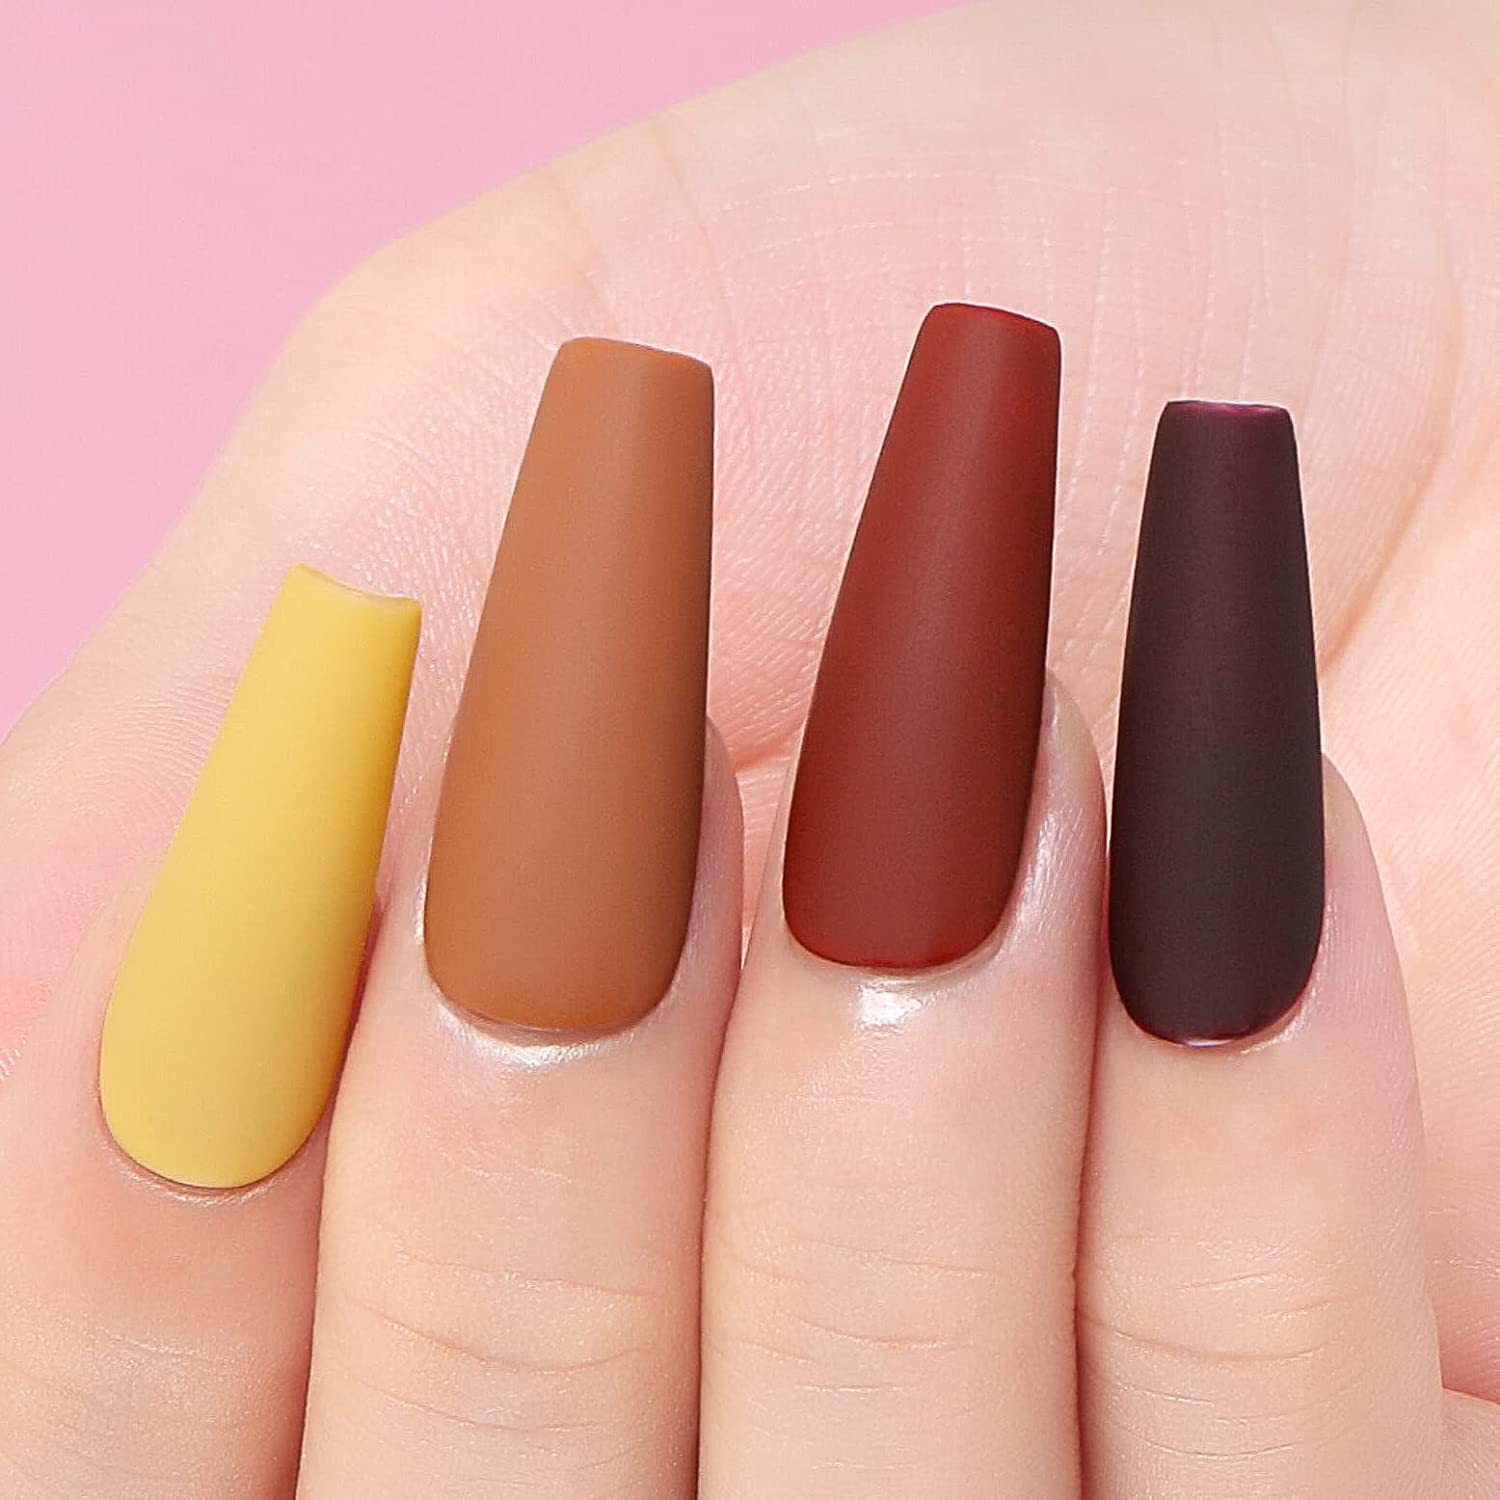 Buy MI Fashion Matte Nail Polish Set Multicolor Coffee, Tomato Red, Maroon  and Nude Colors of 4 Pcs 9.9ml each Online at Low Prices in India -  Amazon.in